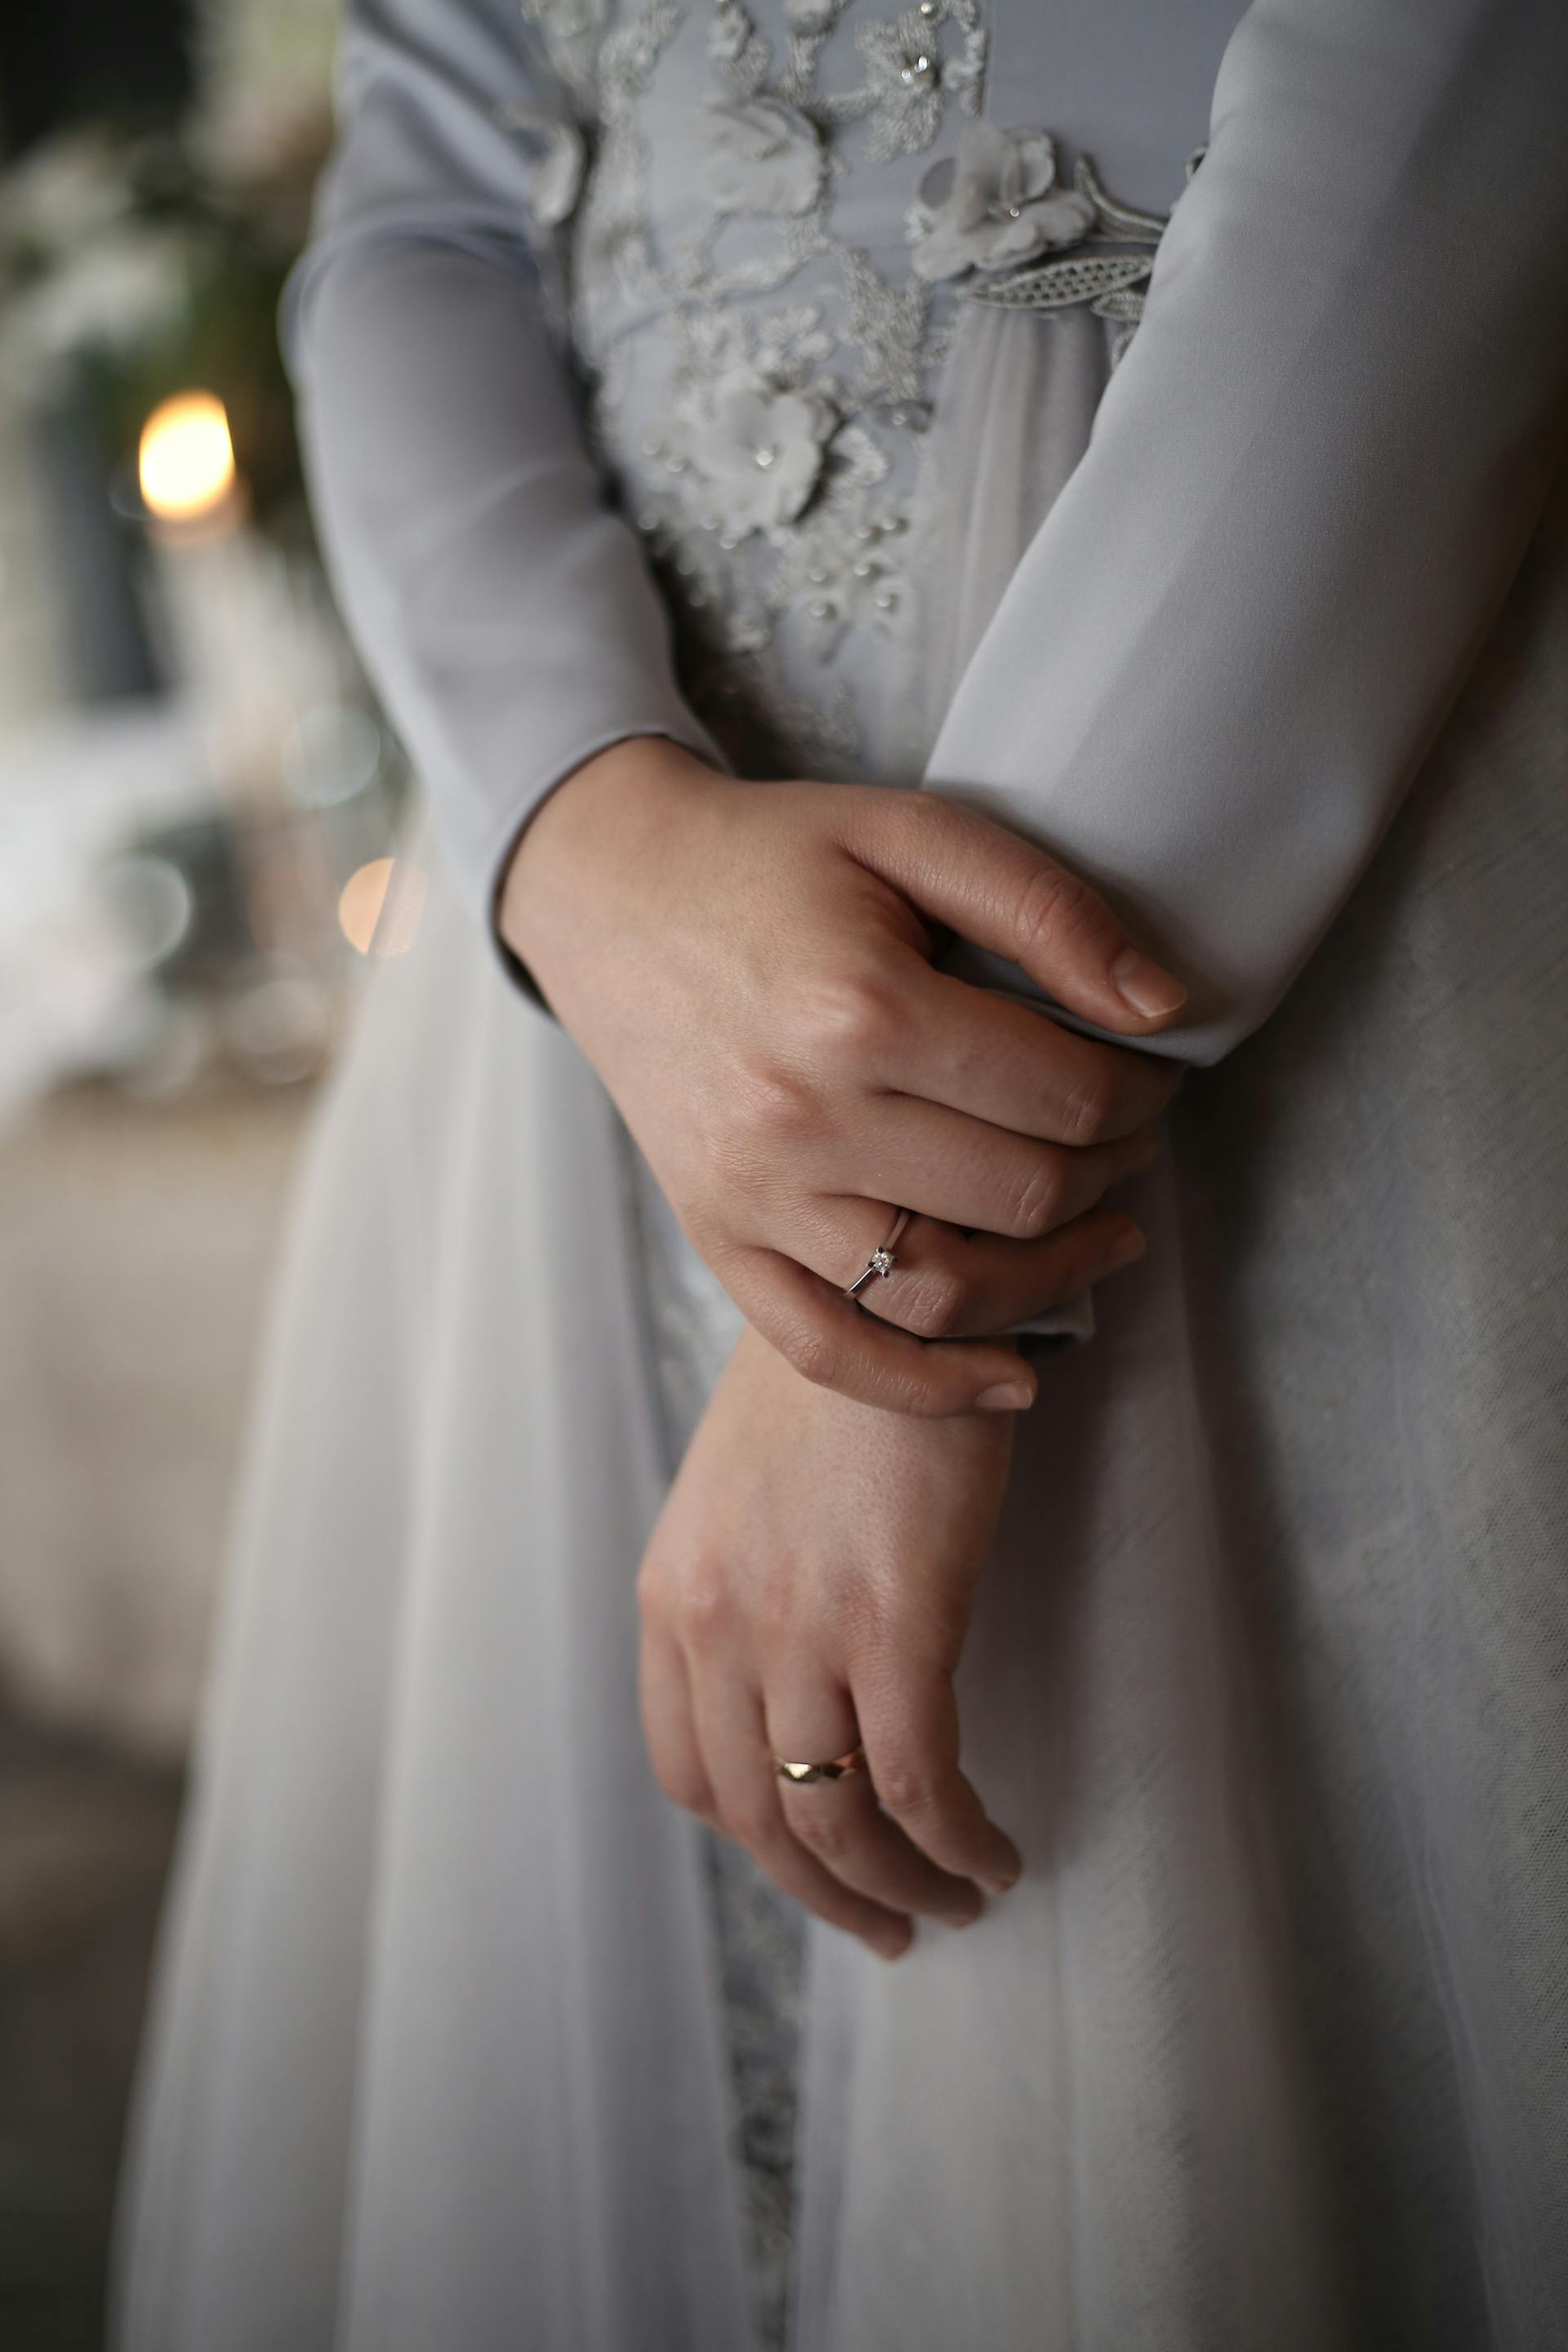 A close-up shot of a woman clasping her wrist | Source: Pexels